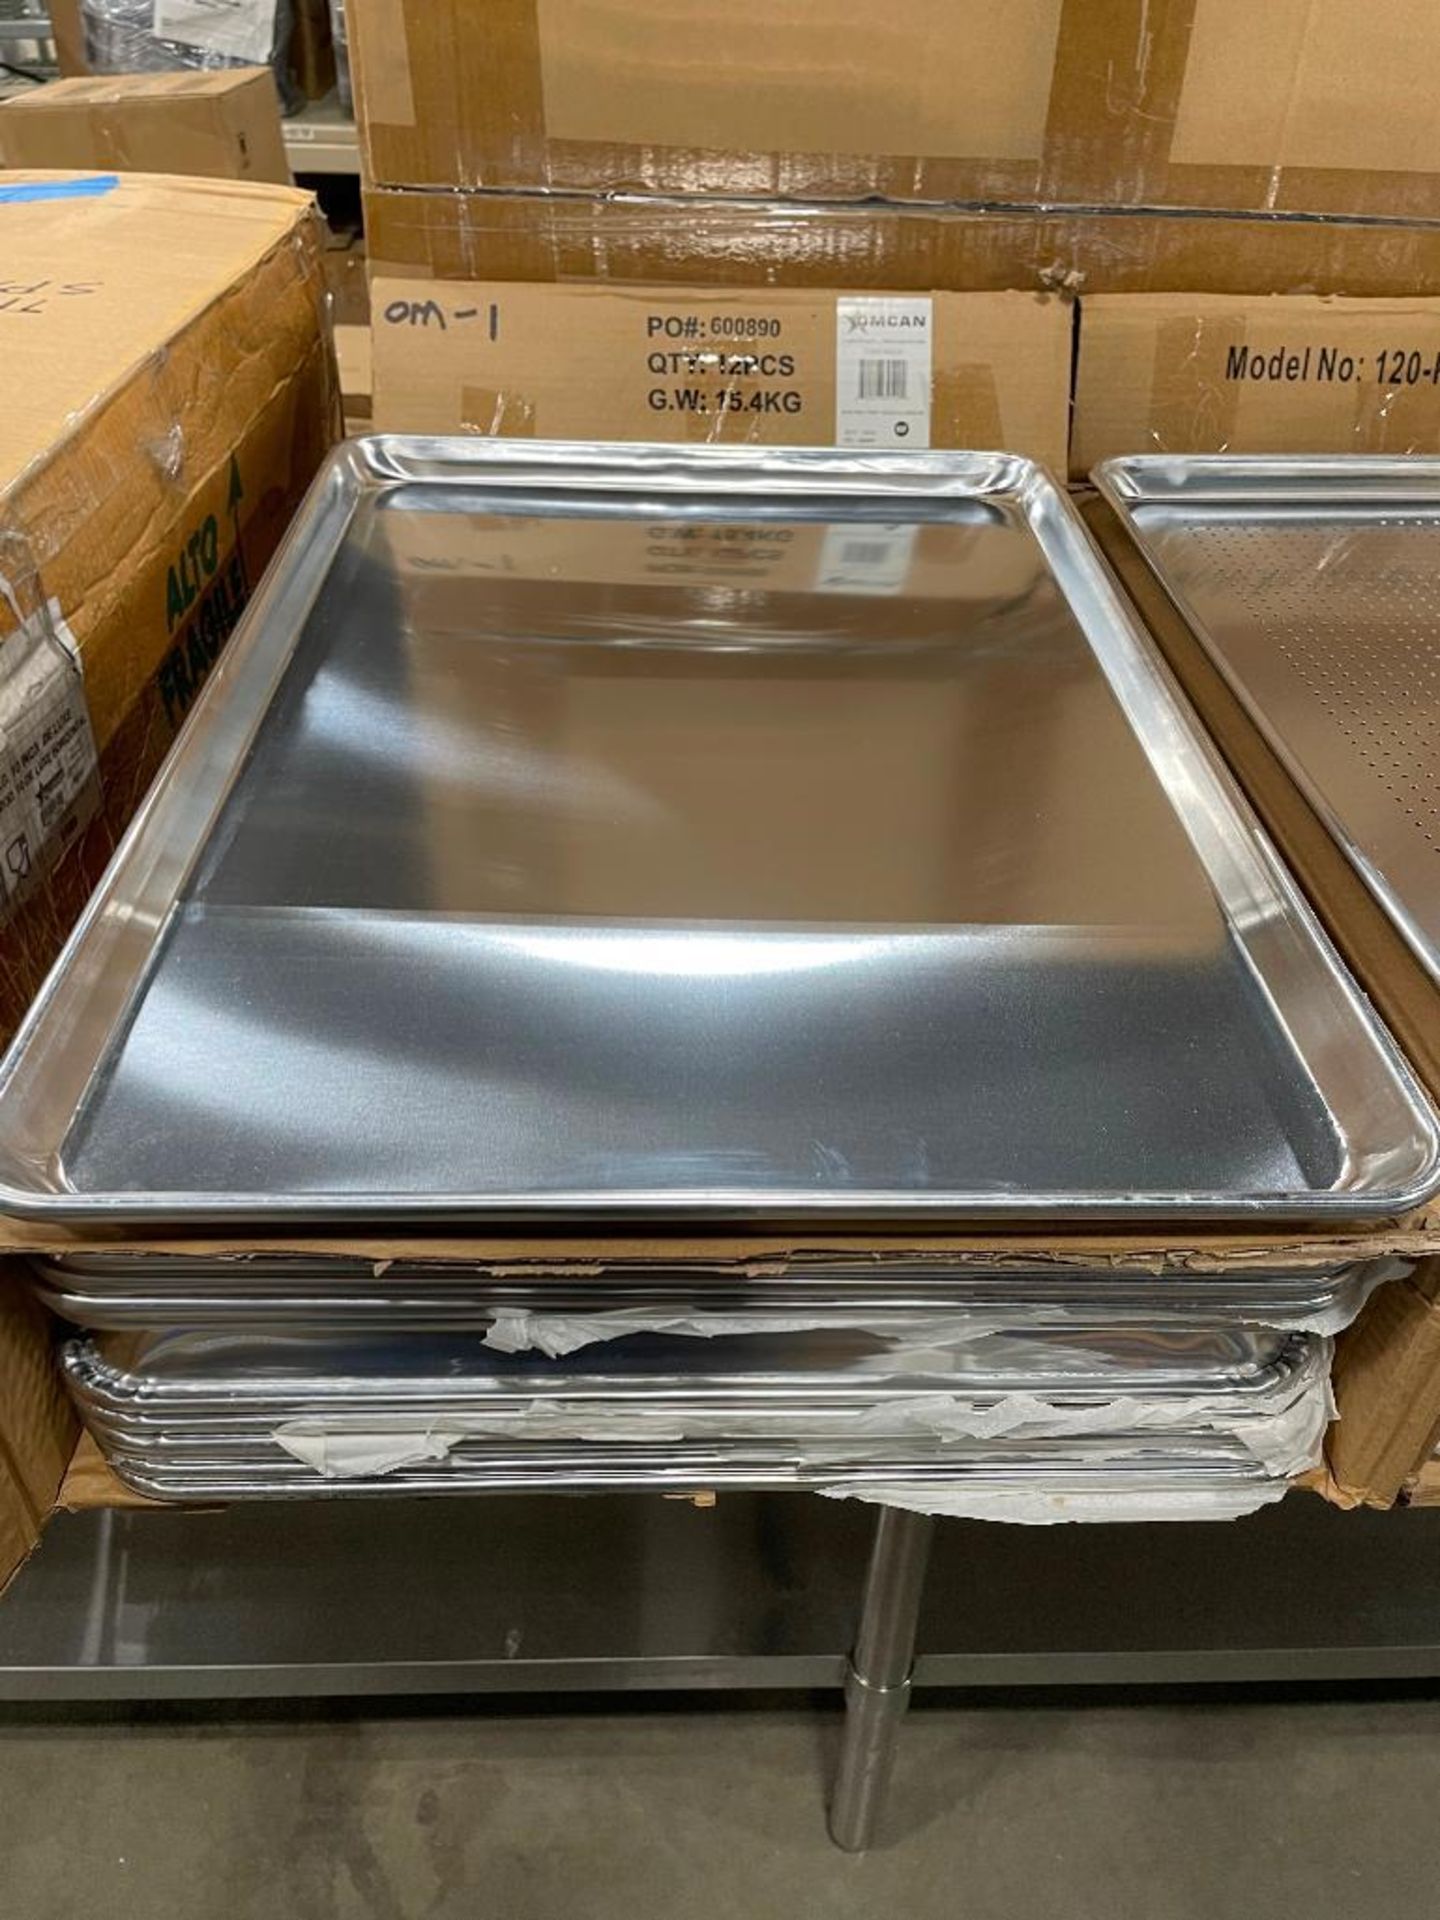 CASE OF FULL SIZE BUN PANS & CASE OF FULL SIZE PERFORATED BUN PANS, LOT OF 24. - NEW - Image 5 of 10